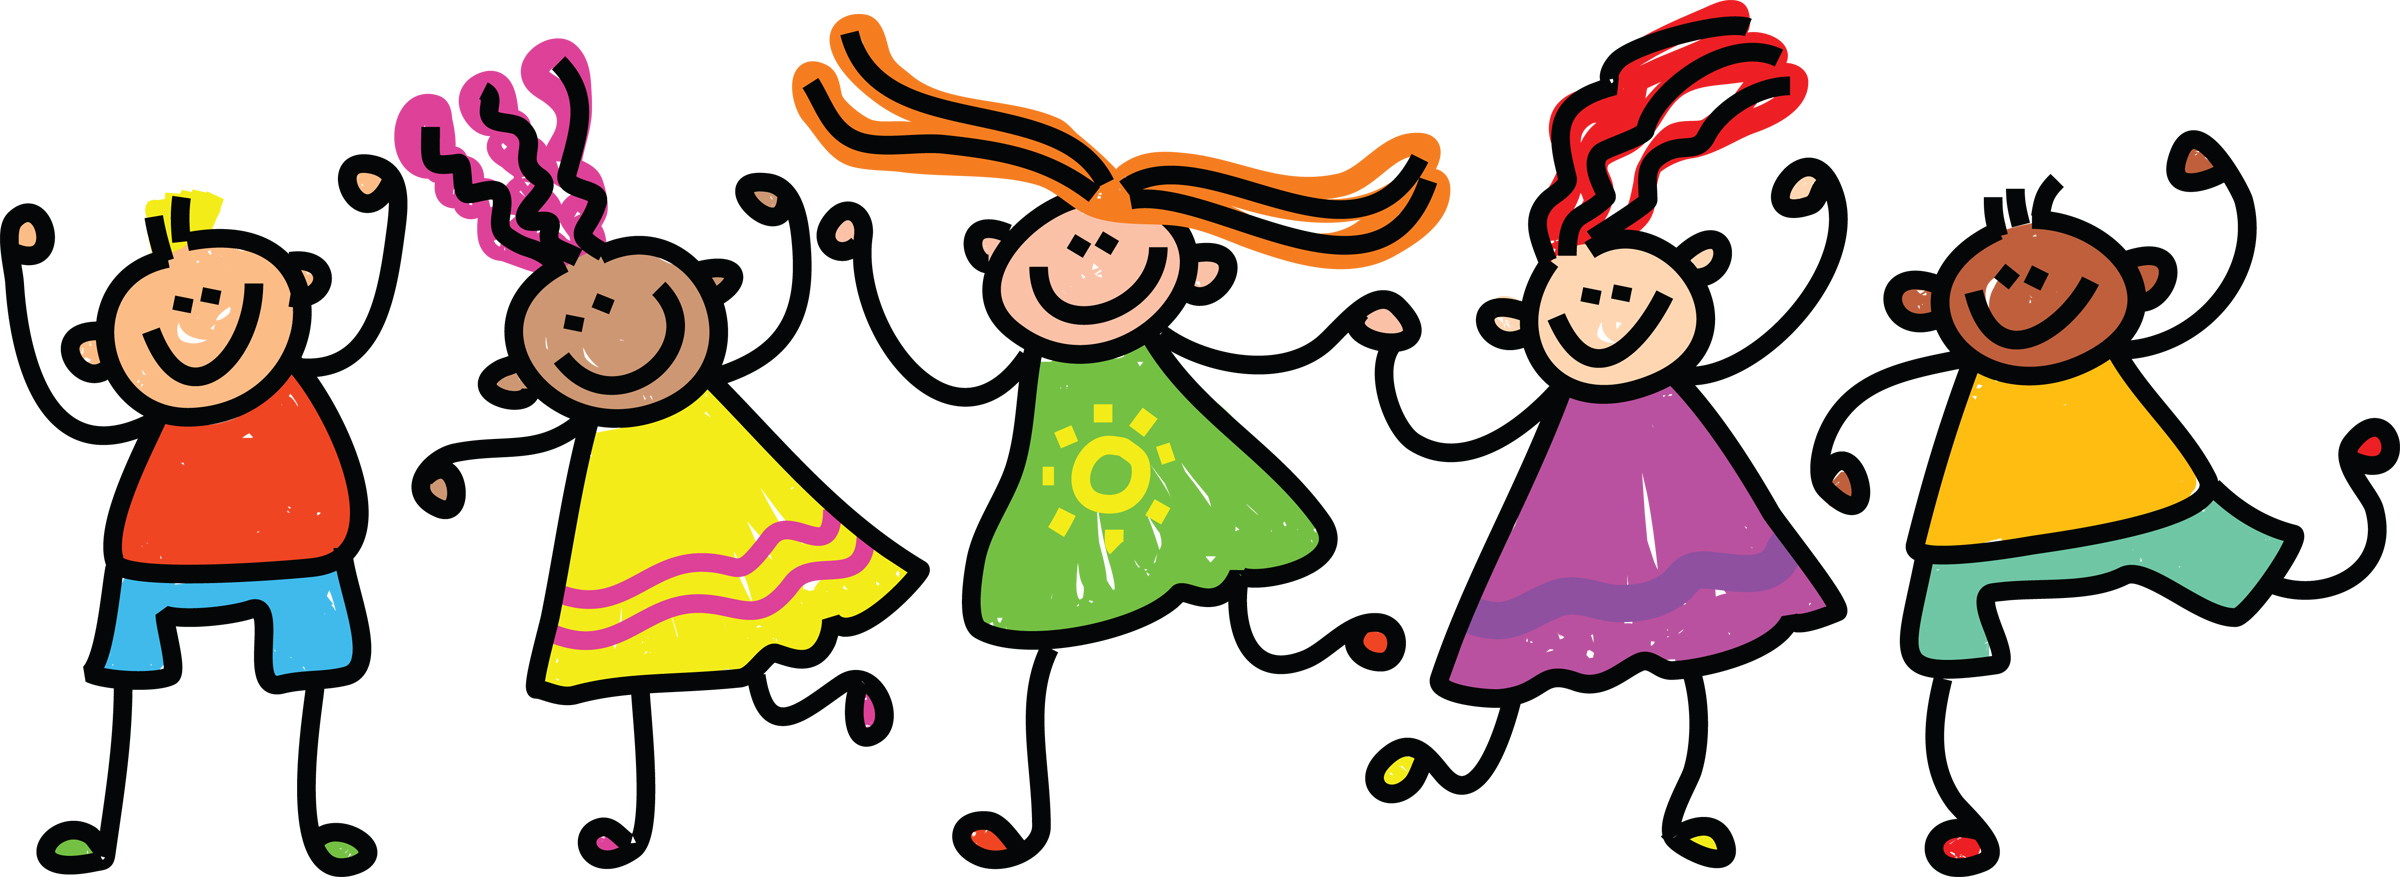 Excited kids clipart free cli - Free Clip Art For Kids